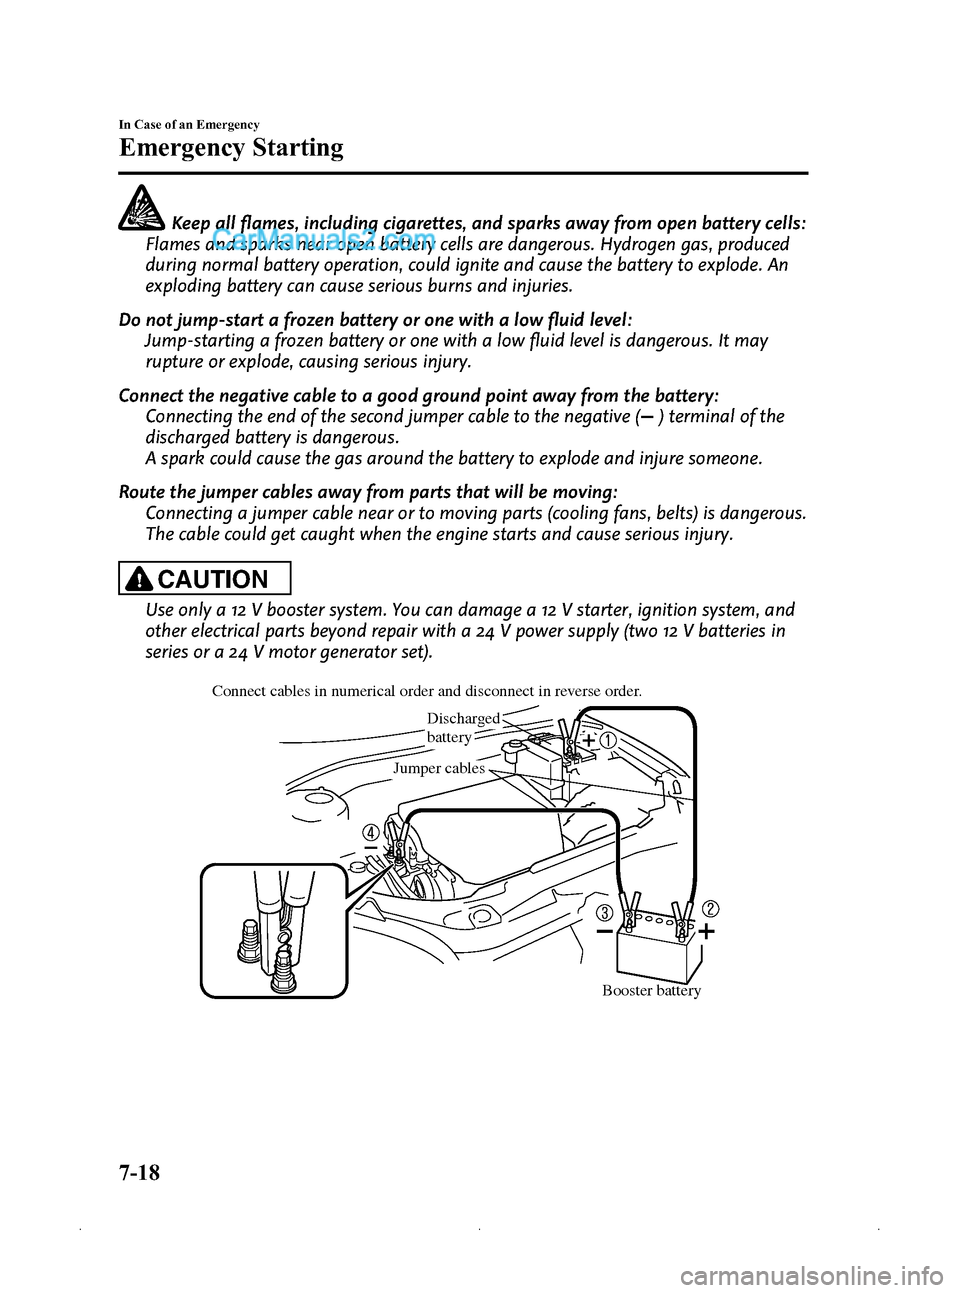 MAZDA MODEL MAZDASPEED 3 2009  Owners Manual (in English) Black plate (280,1)
Keep all flames, including cigarettes, and sparks away from open battery cells:
Flames and sparks near open battery cells are dangerous. Hydrogen gas, produced
during normal batter